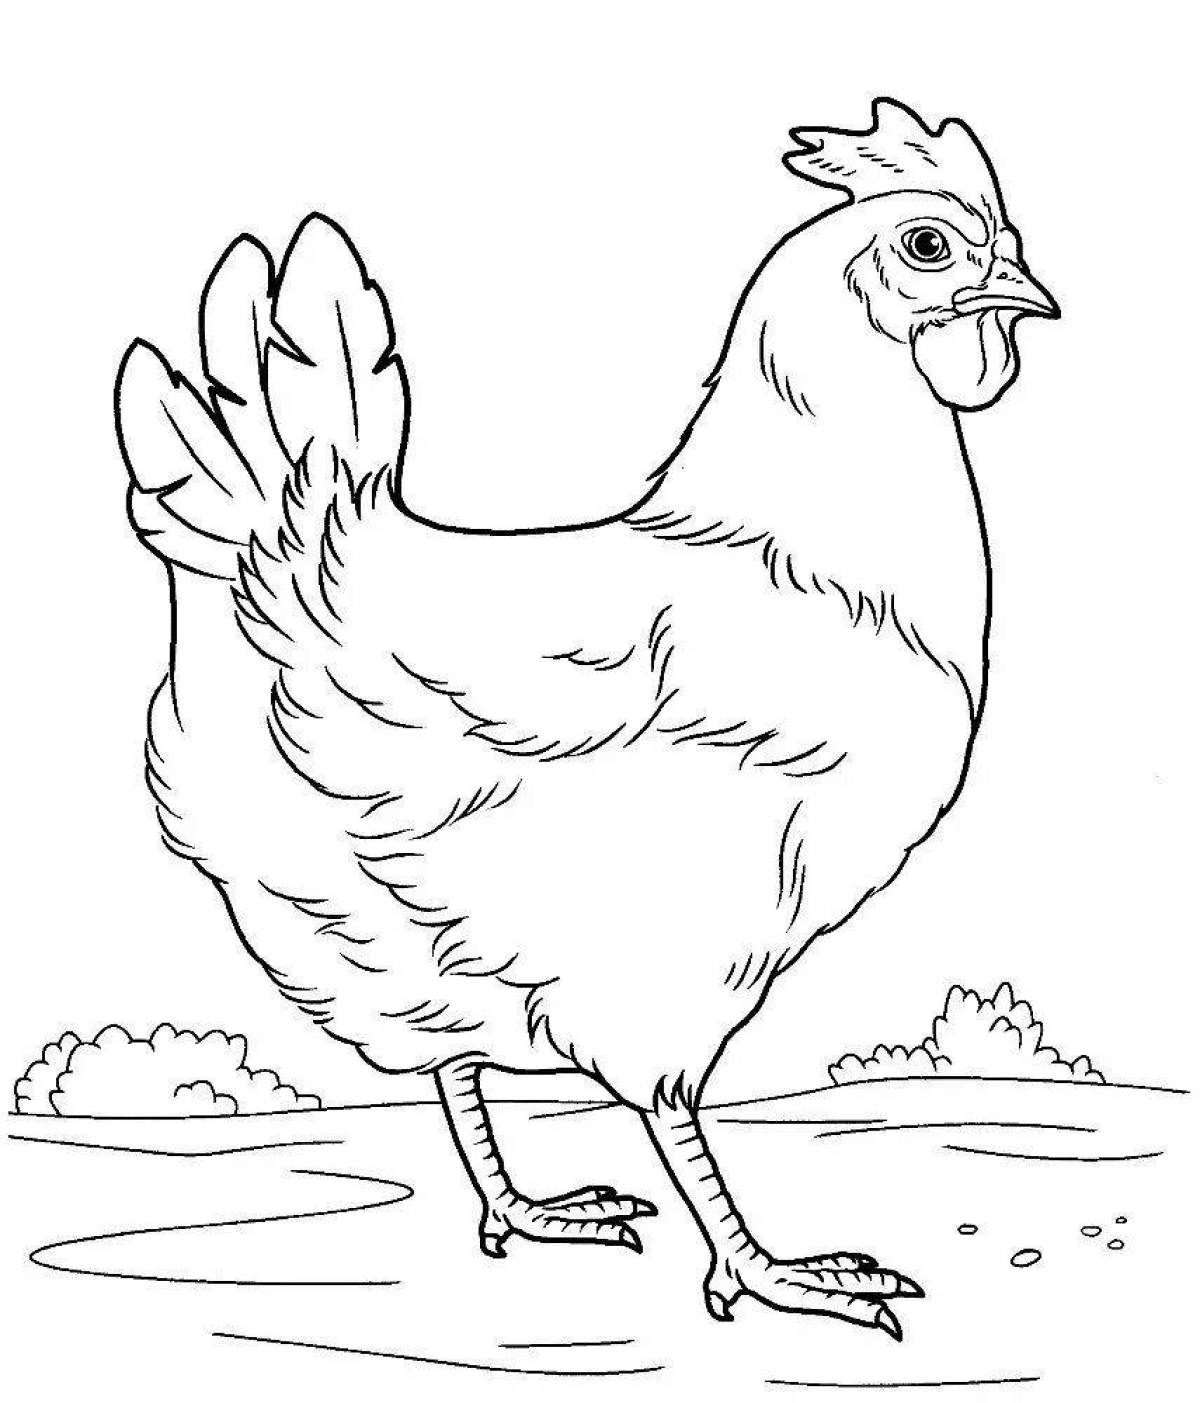 Cute poultry coloring book for 6-7 year olds